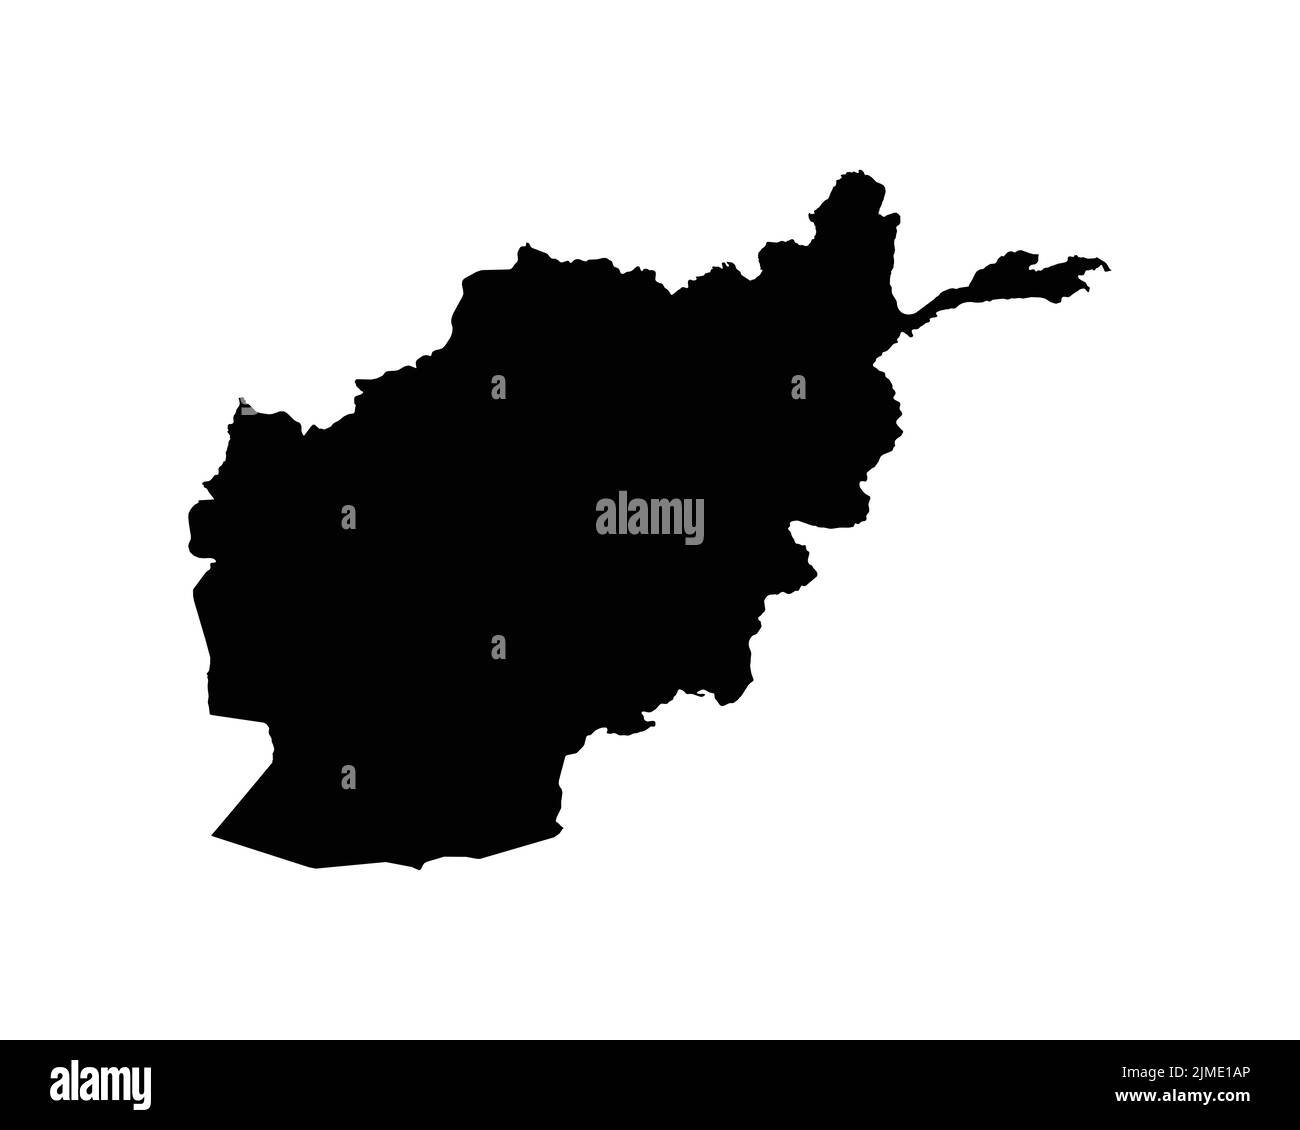 Afghanistan Map. Afghan Country Map. Black and White National Outline Boundary Border Shape Geography Territory EPS Vector Illustration Clipart Stock Vector